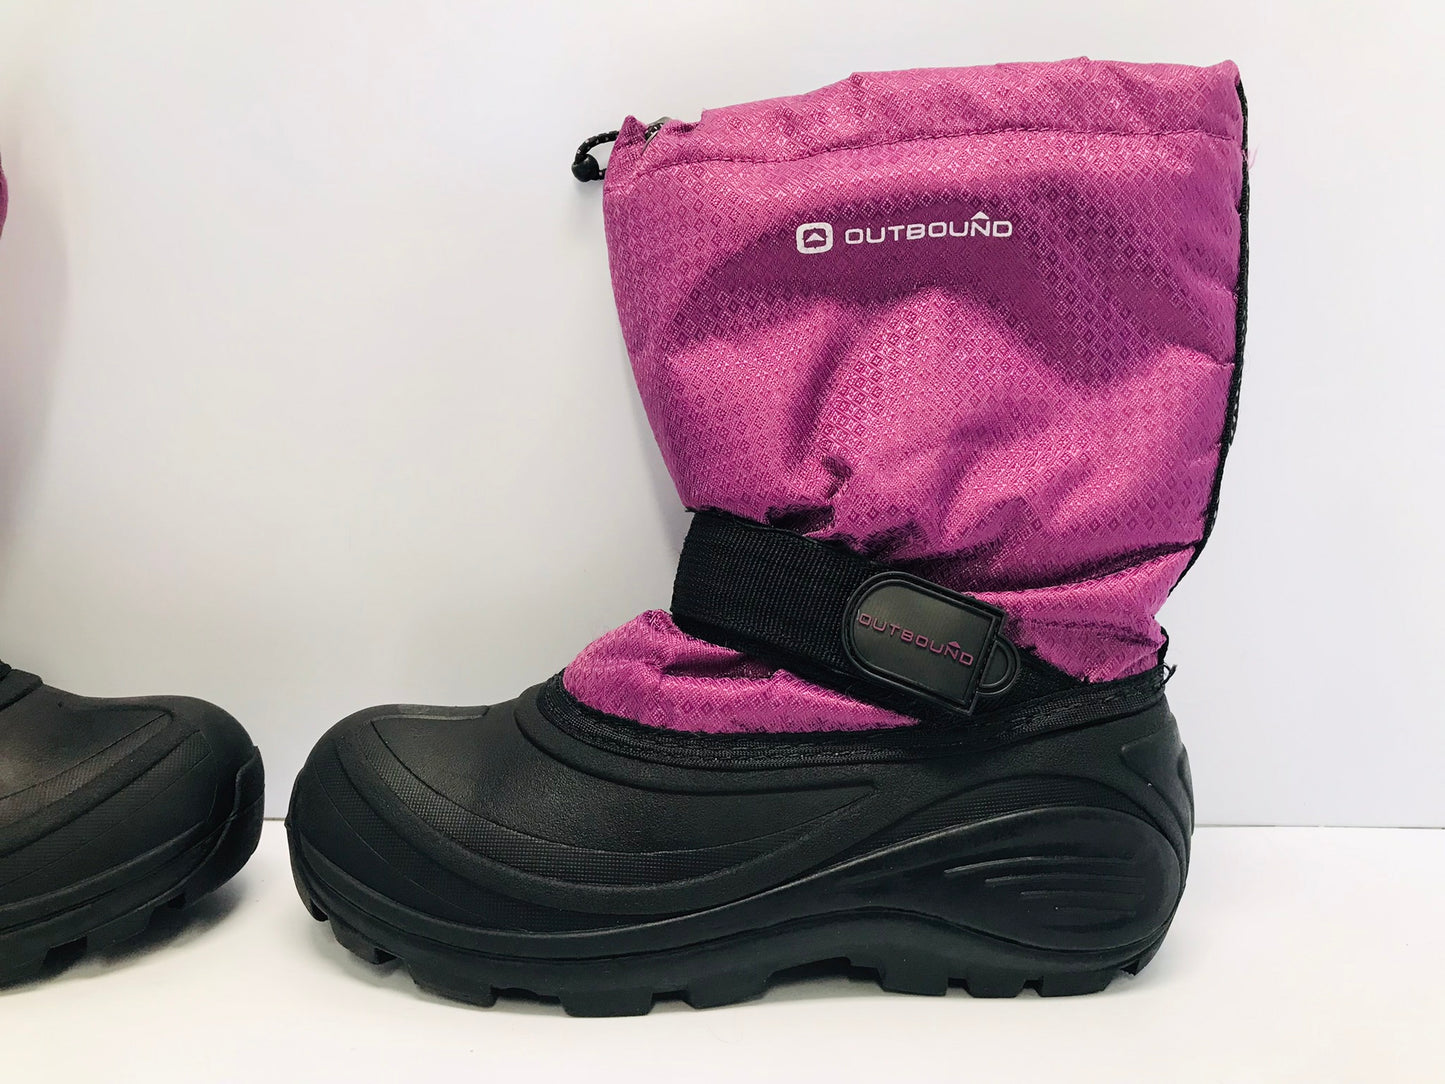 Winter Boots Child Size 4 Outback With Liner Waterproof Rubber Soles Black Purple Excellent